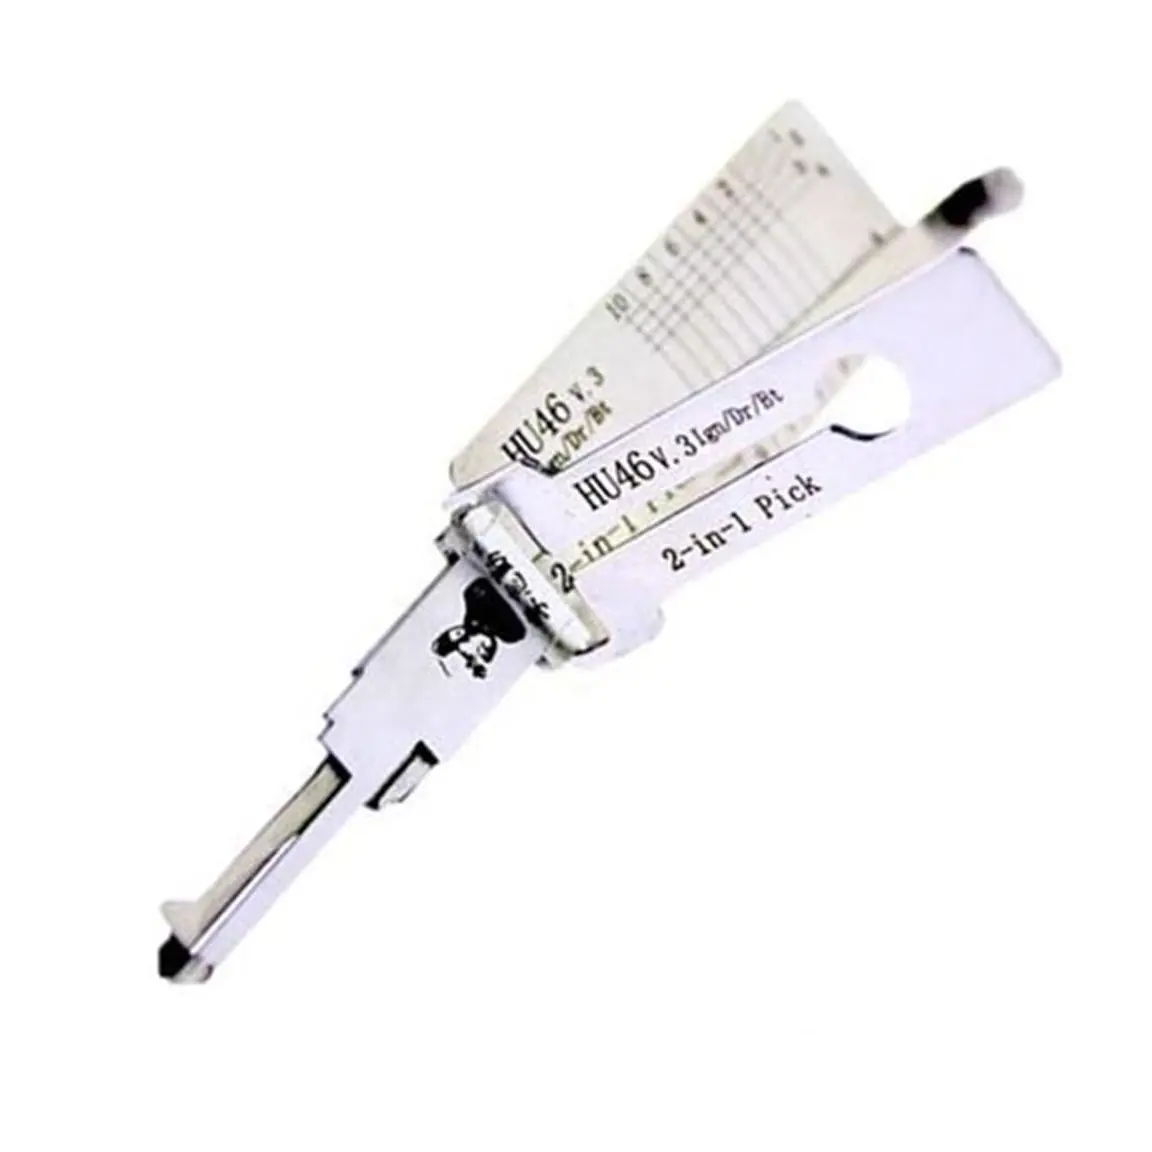 Hot LISHI HU46 2 in 1Auto Pick and Decoder for Locksmith Tool Lock Pick for Auto Sets Lock Pick Locksmith Tool